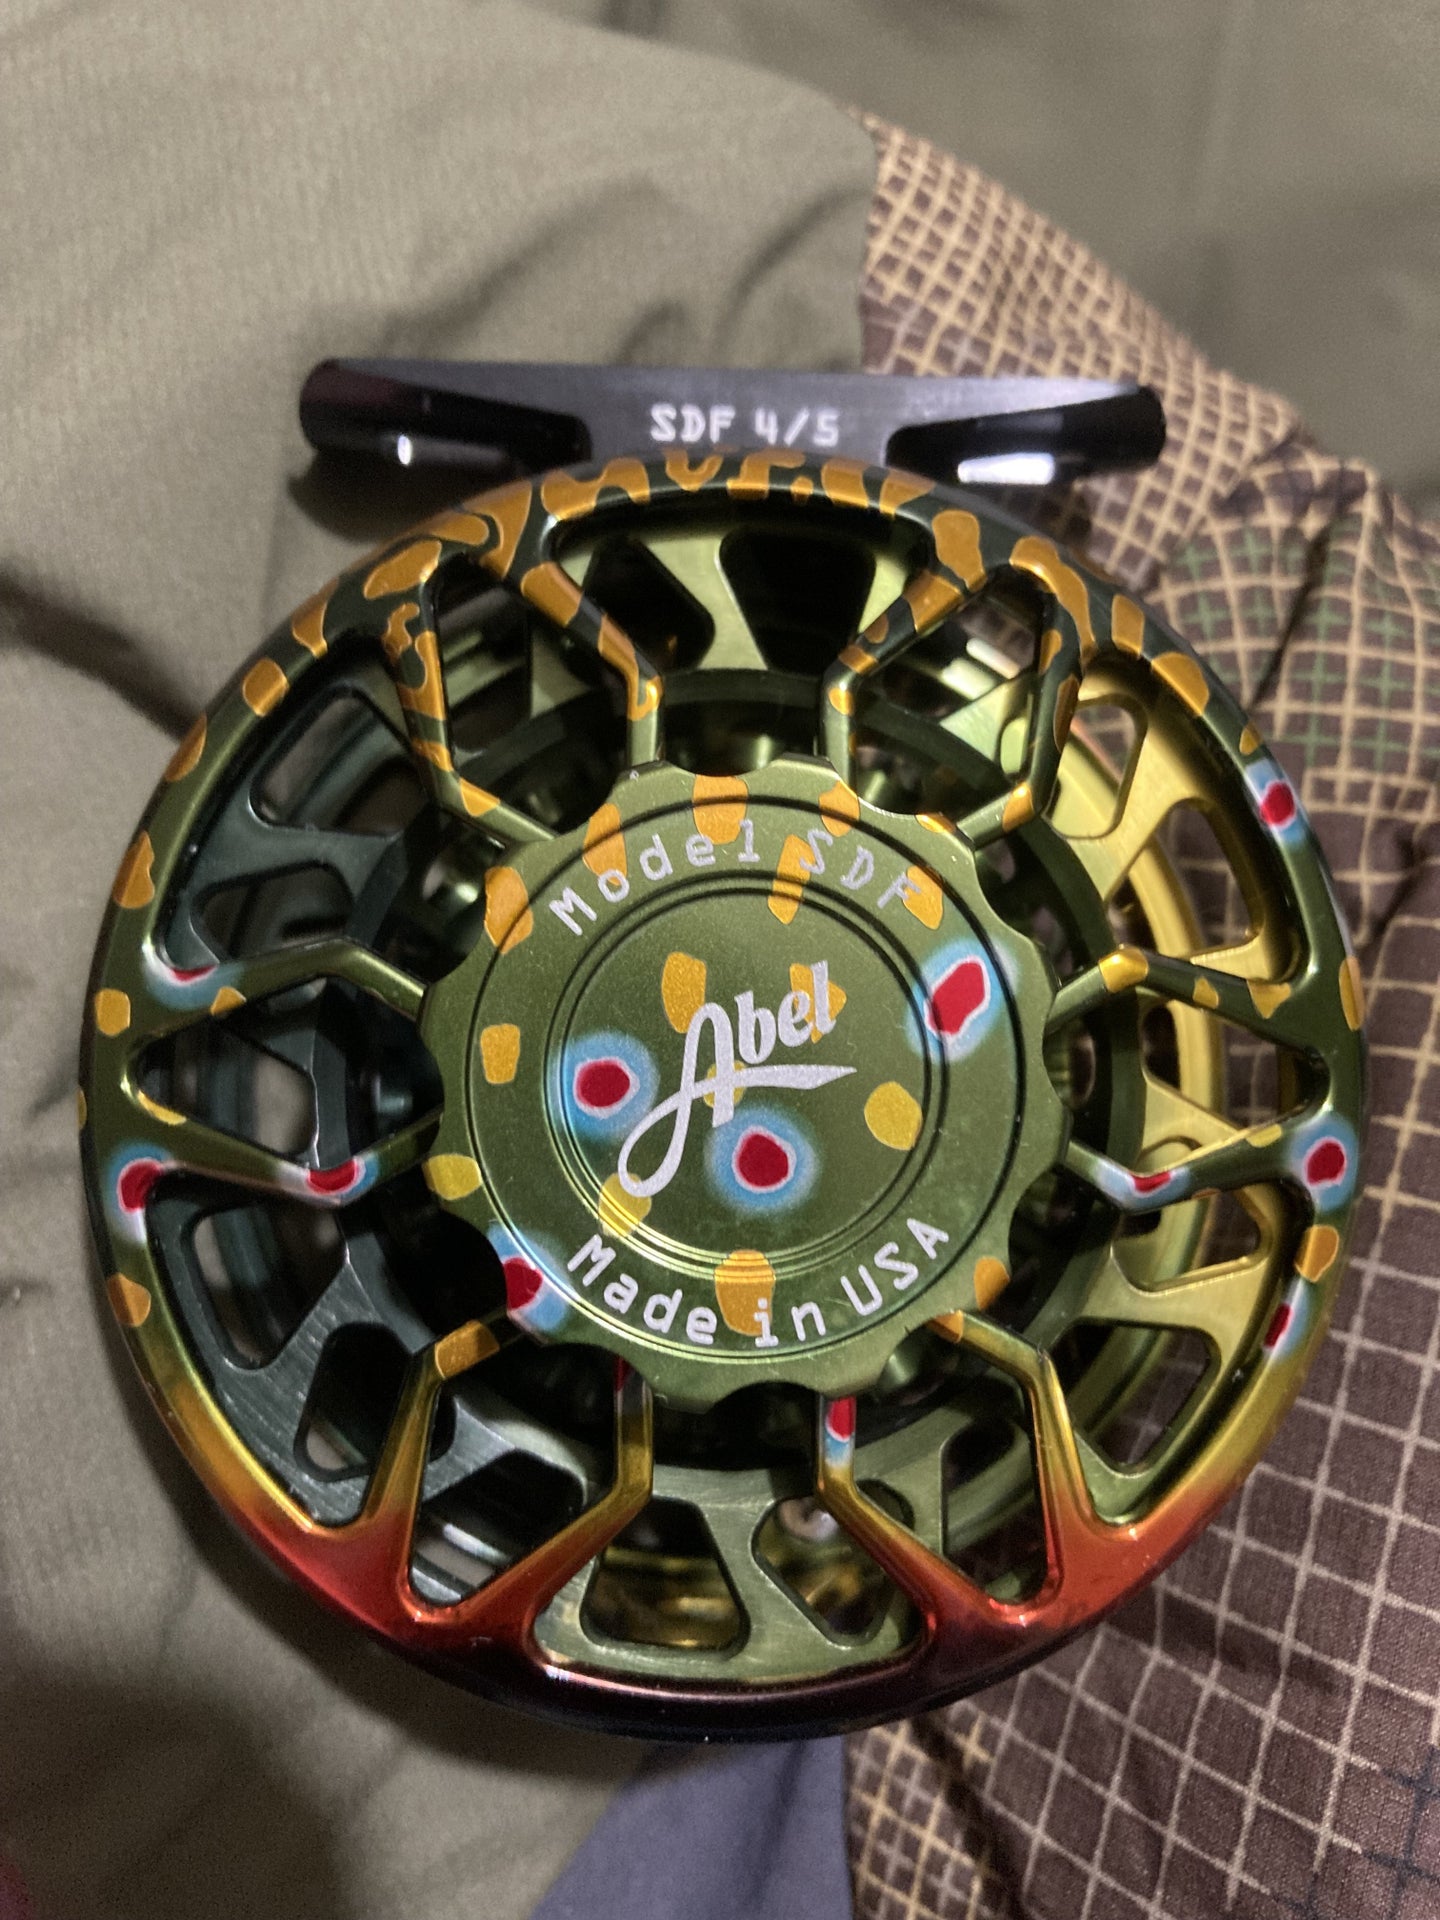 Abel Ported SDF 4/5 Fly Reel In Native Brook Trout